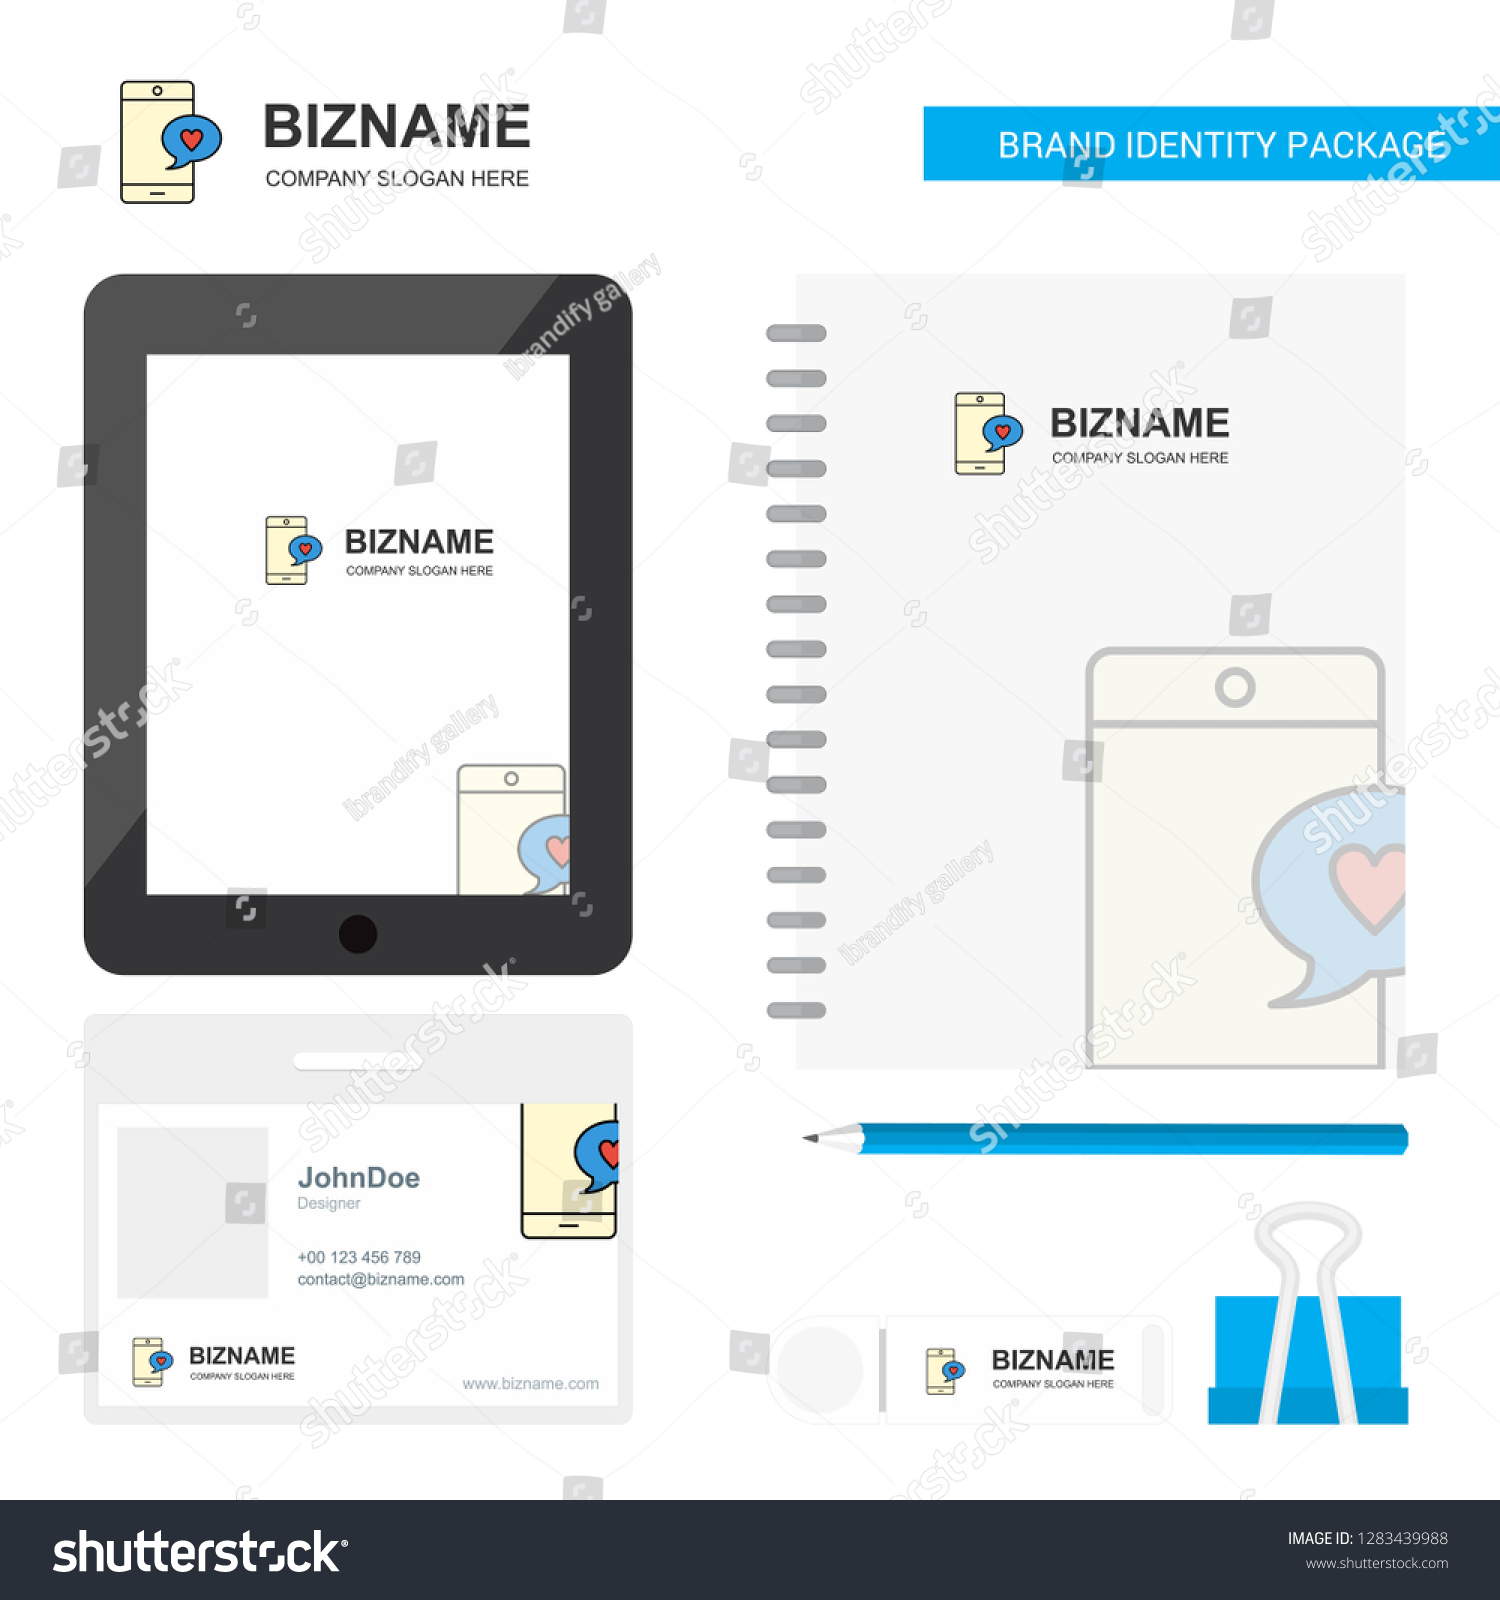 Love chat Business Logo, Tab App, Diary PVC Employee Card and USB Brand Stationary Package Design Vector Template #1283439988